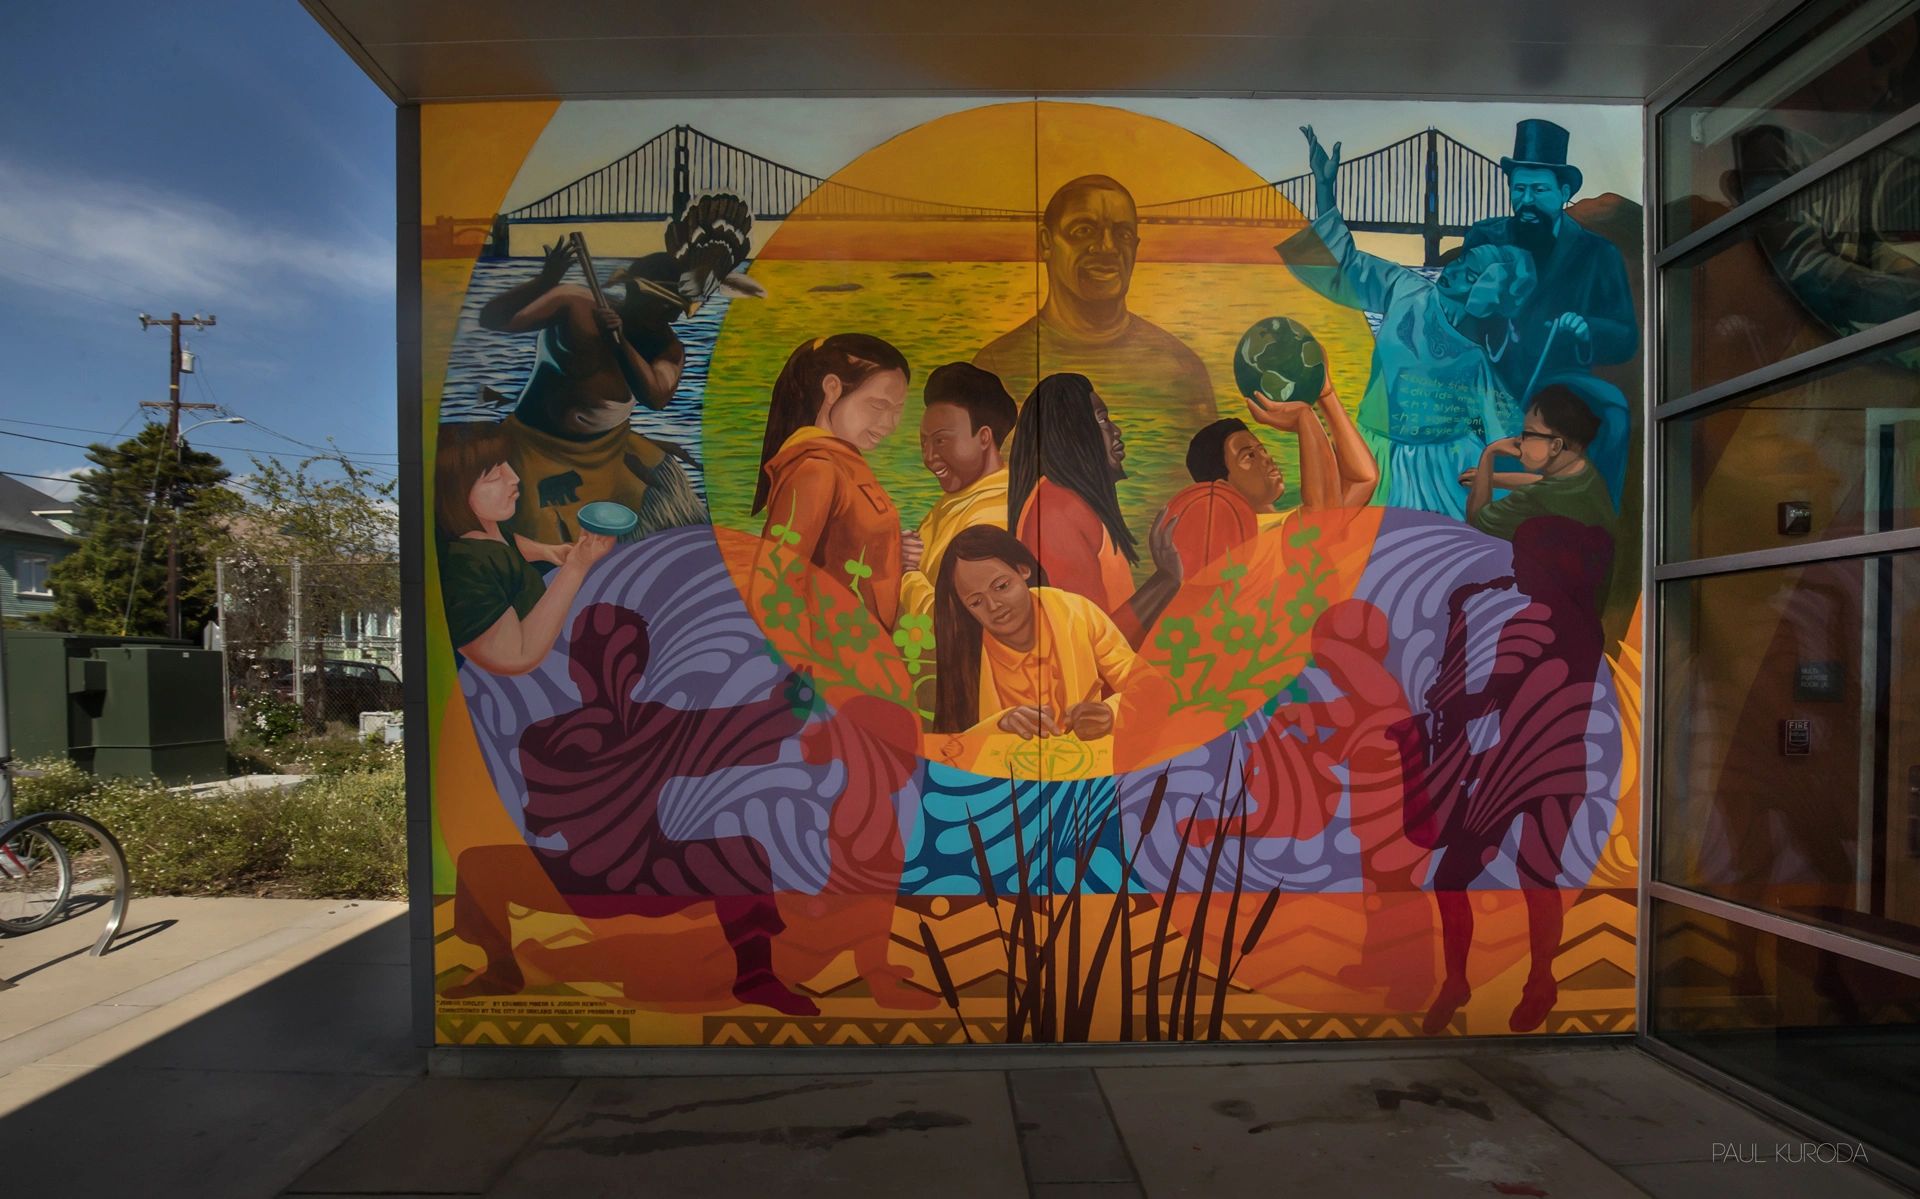 Youth and historic figures painted on vibrant mural at entrance to Recreation Center in Oakland, CA.